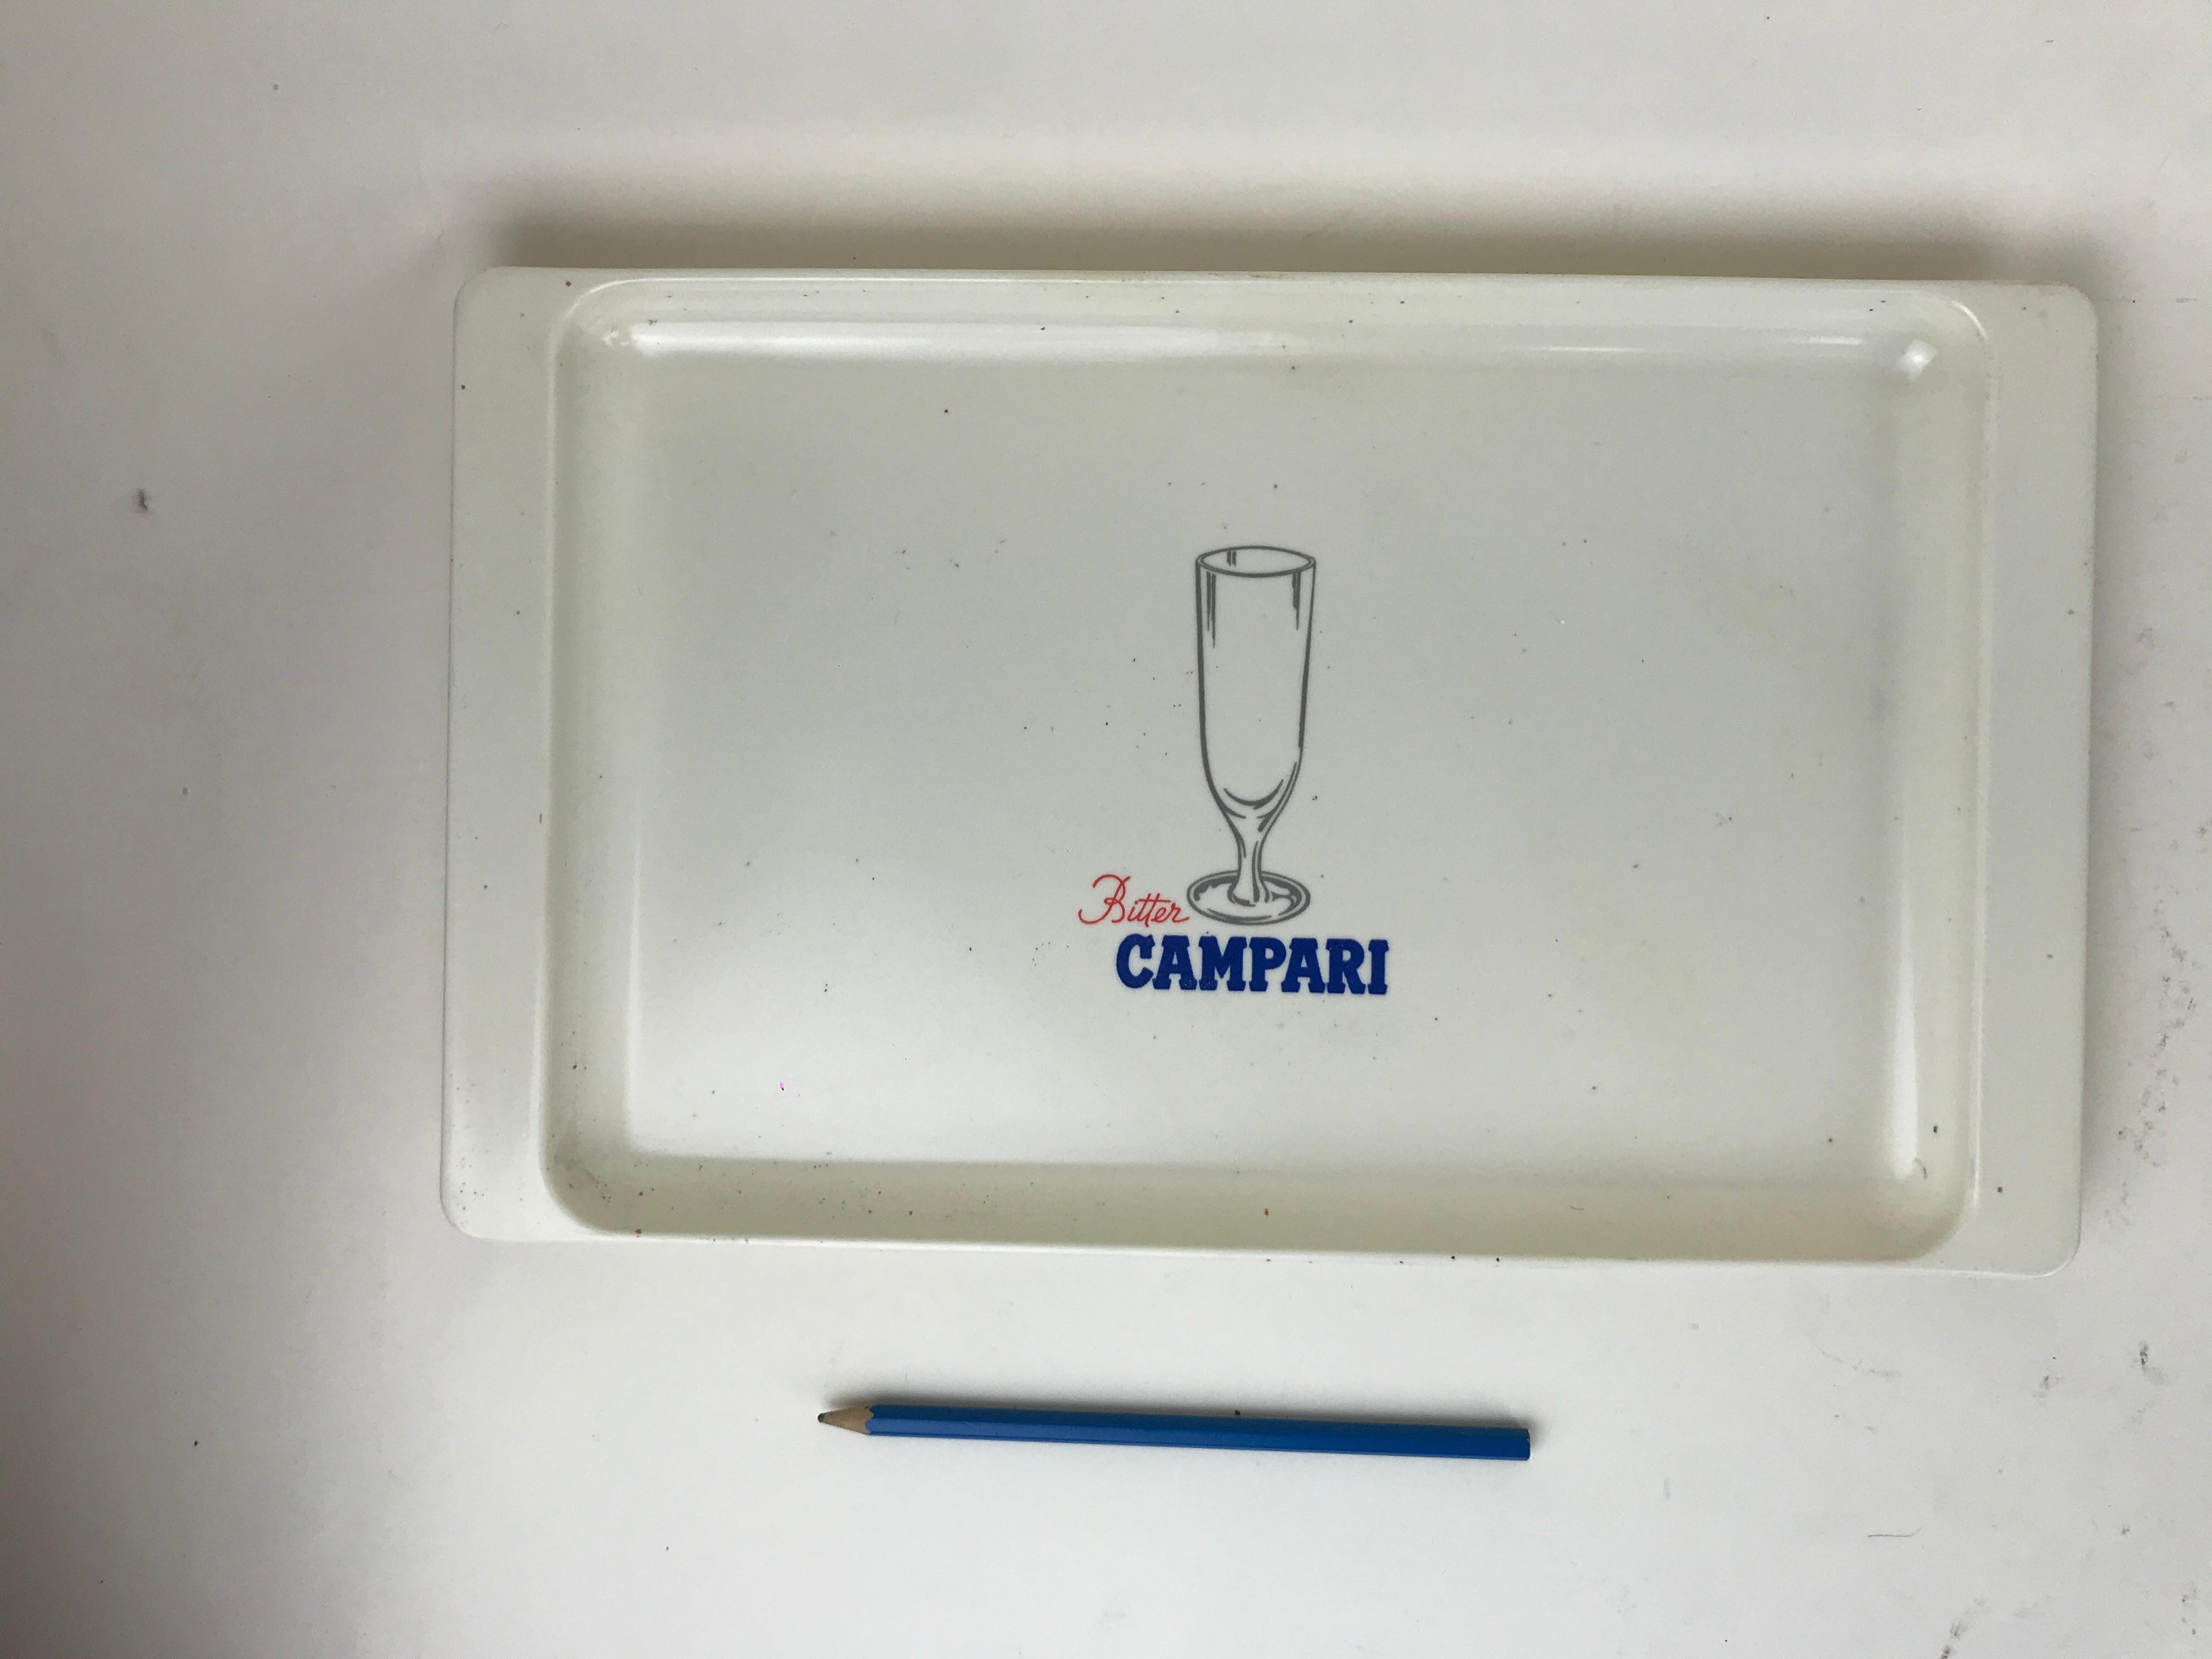 Vintage white plastic rectangular bar tray made in Italy by KEAN Milano for Campari. 

Mark on bottom:
Viale Maino 25
KEAN
Milano
Made in Italy

Collector's note:

Campari is an Italian alcoholic liqueur, considered an apéritif obtained